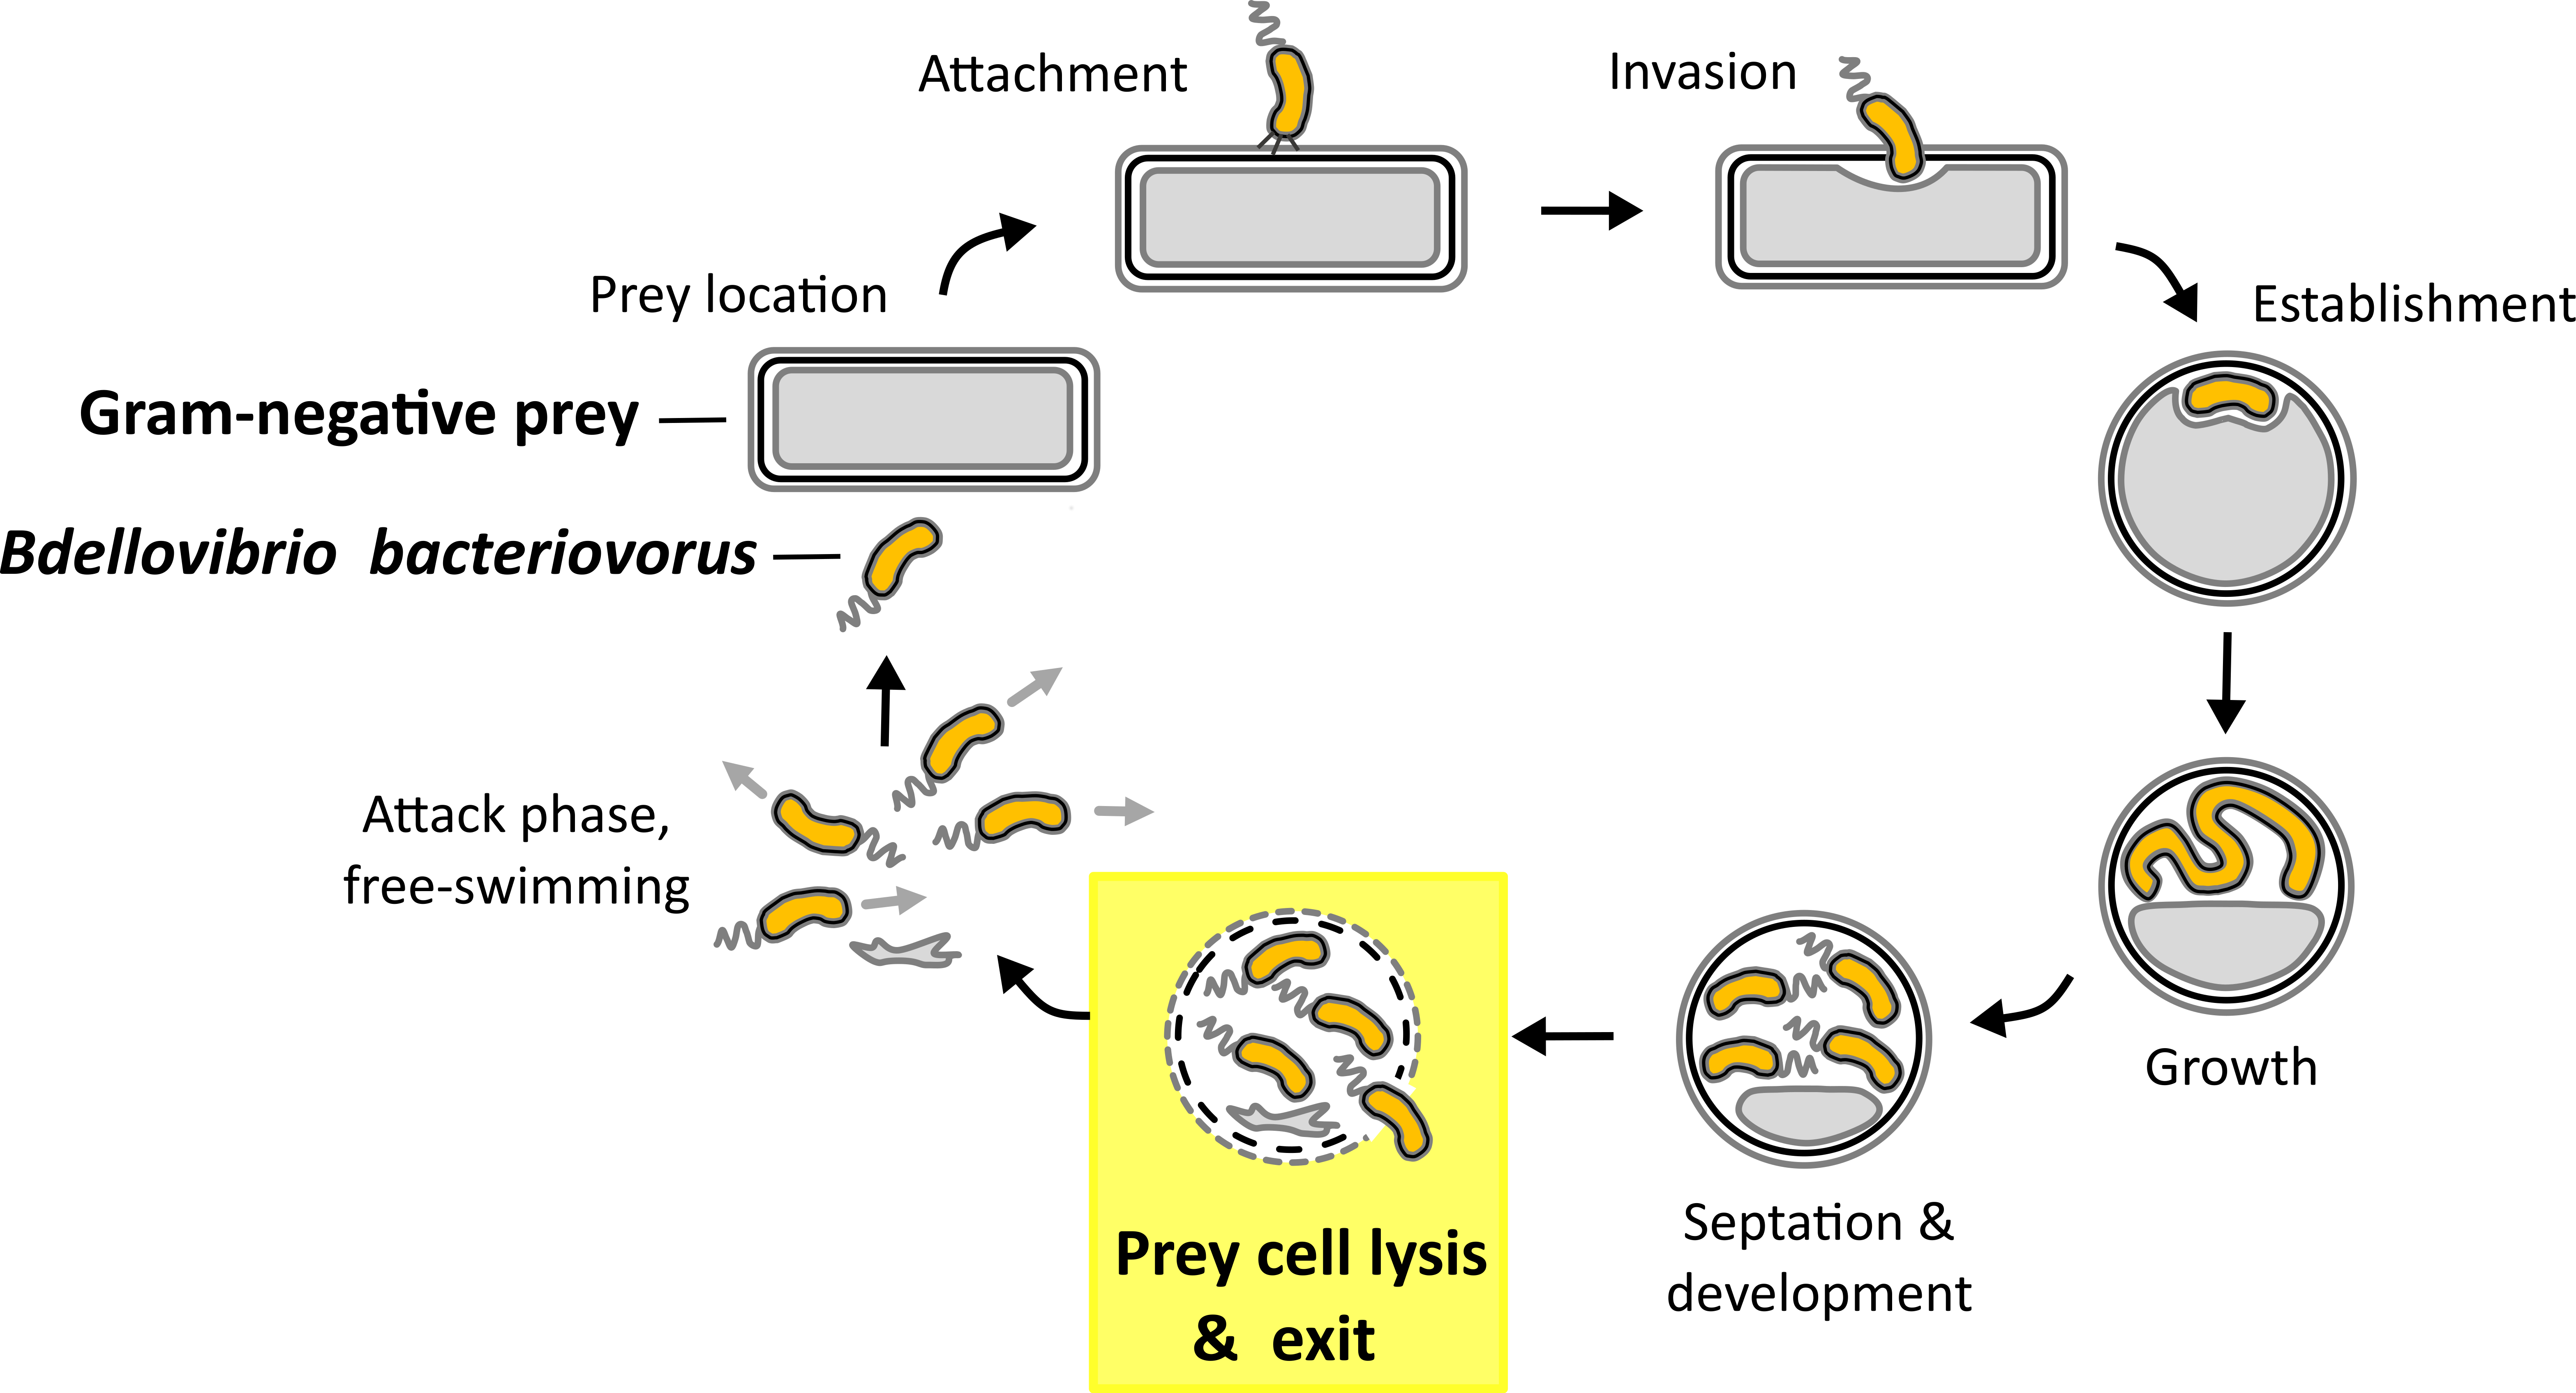 Fig. 1. Predatory life cycle of B. bacteriovorus HD100. In the predatory life cycle predator B. bacteriovorus divides within the periplasm of the Gram-negative prey bacterium. In the exit phase juvenile prey cells leave the depleted prey cell